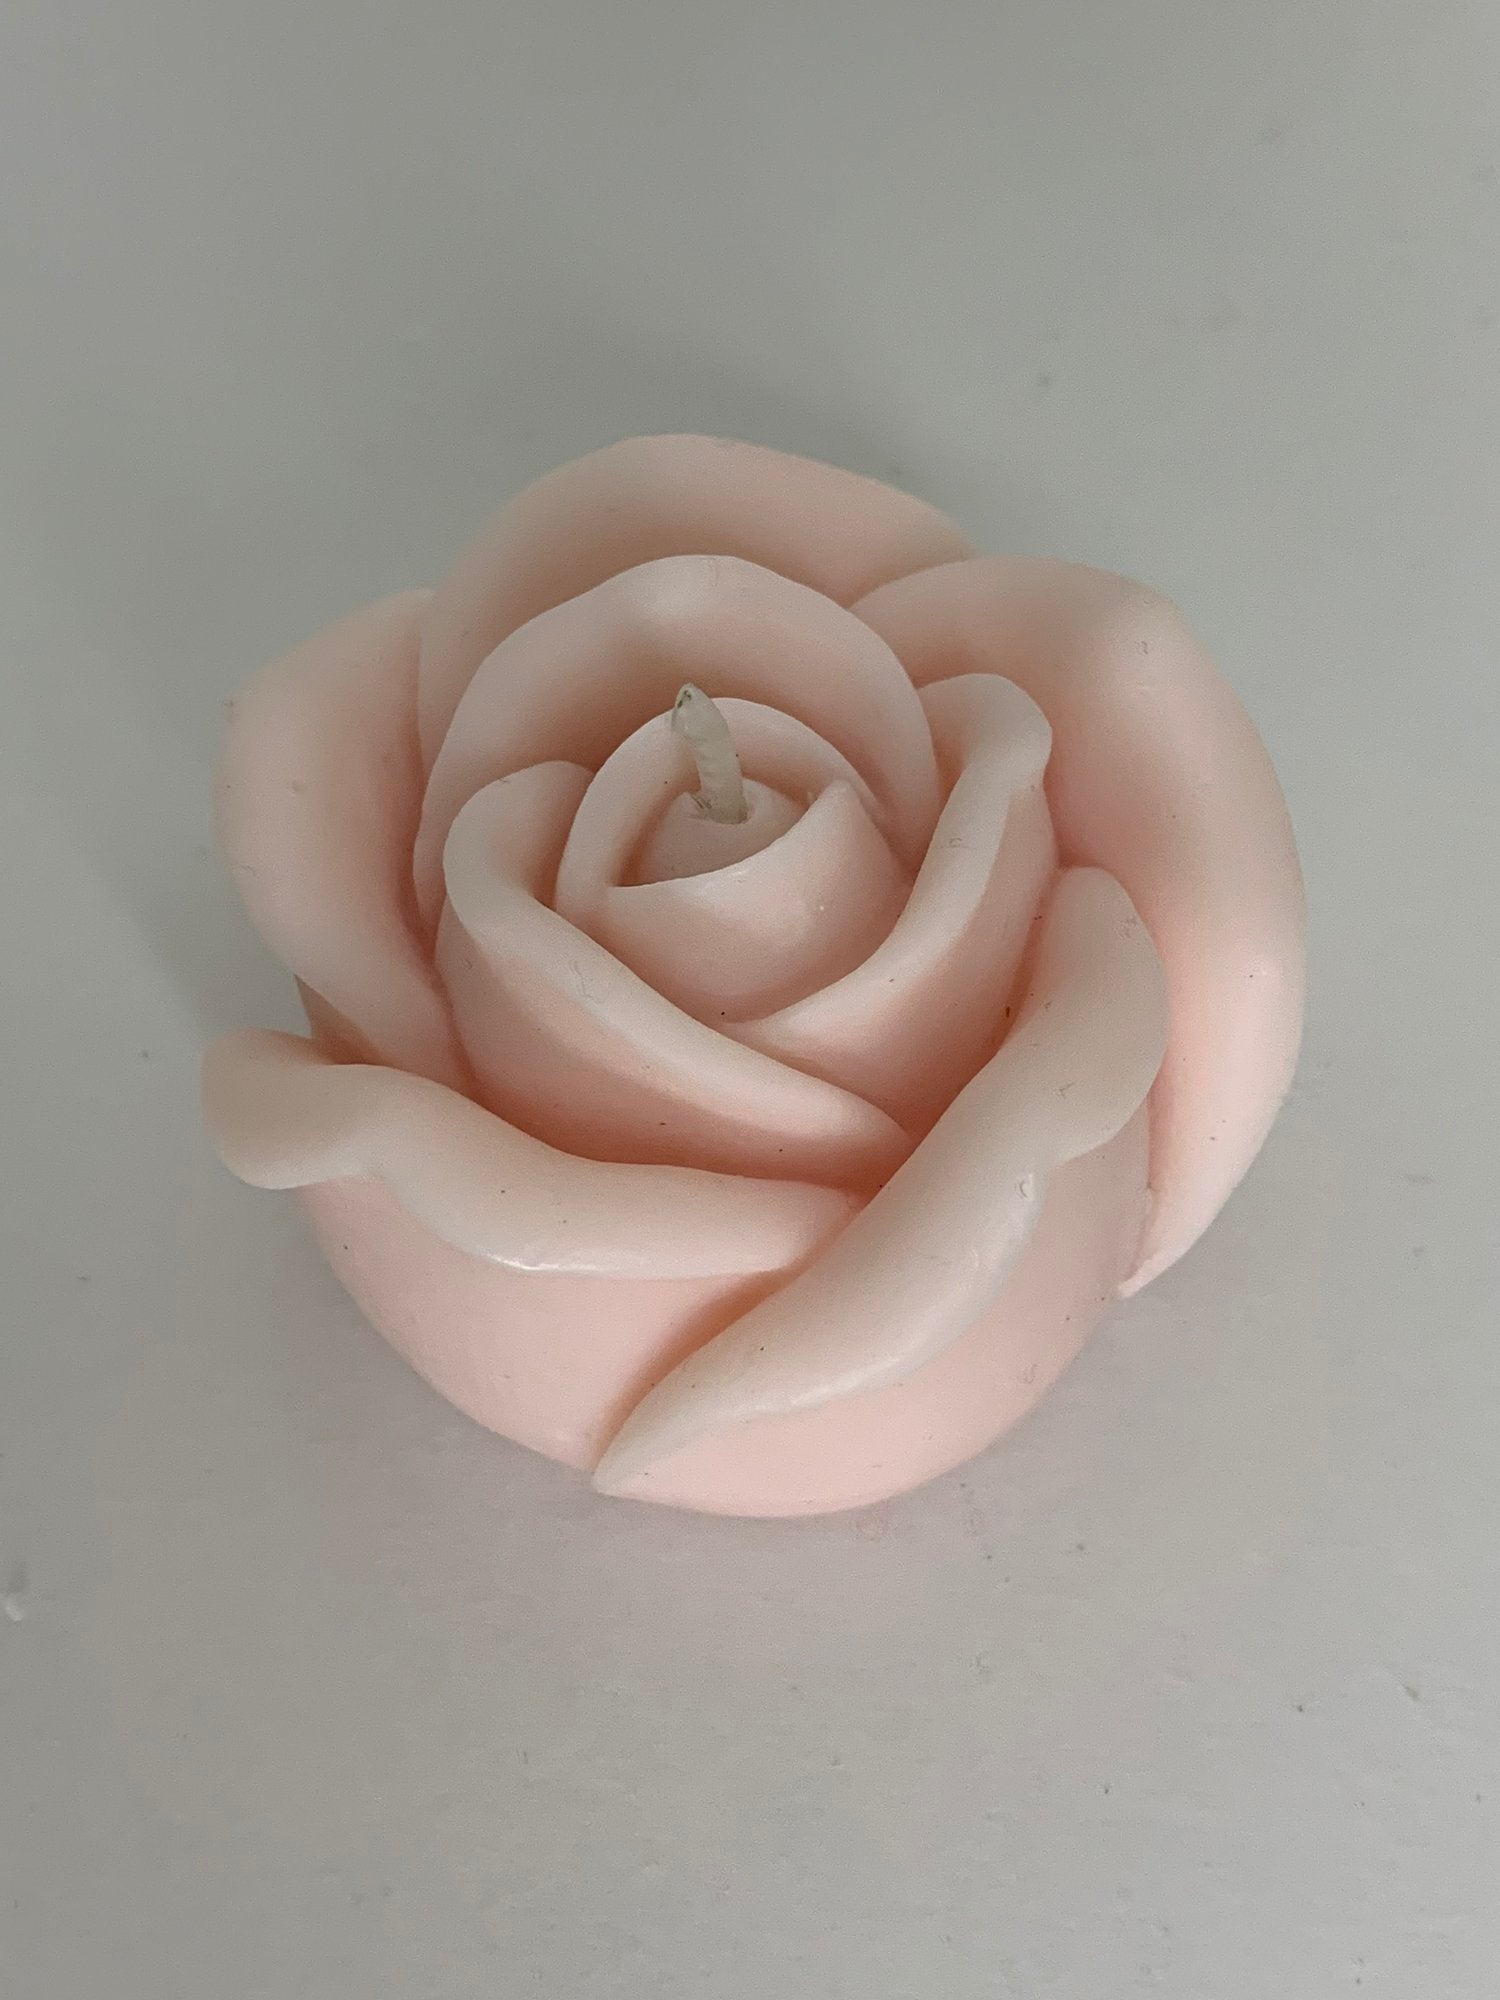 Flower Candle by Comfort Collective London Available in Rose Pink, Yellow or Cream